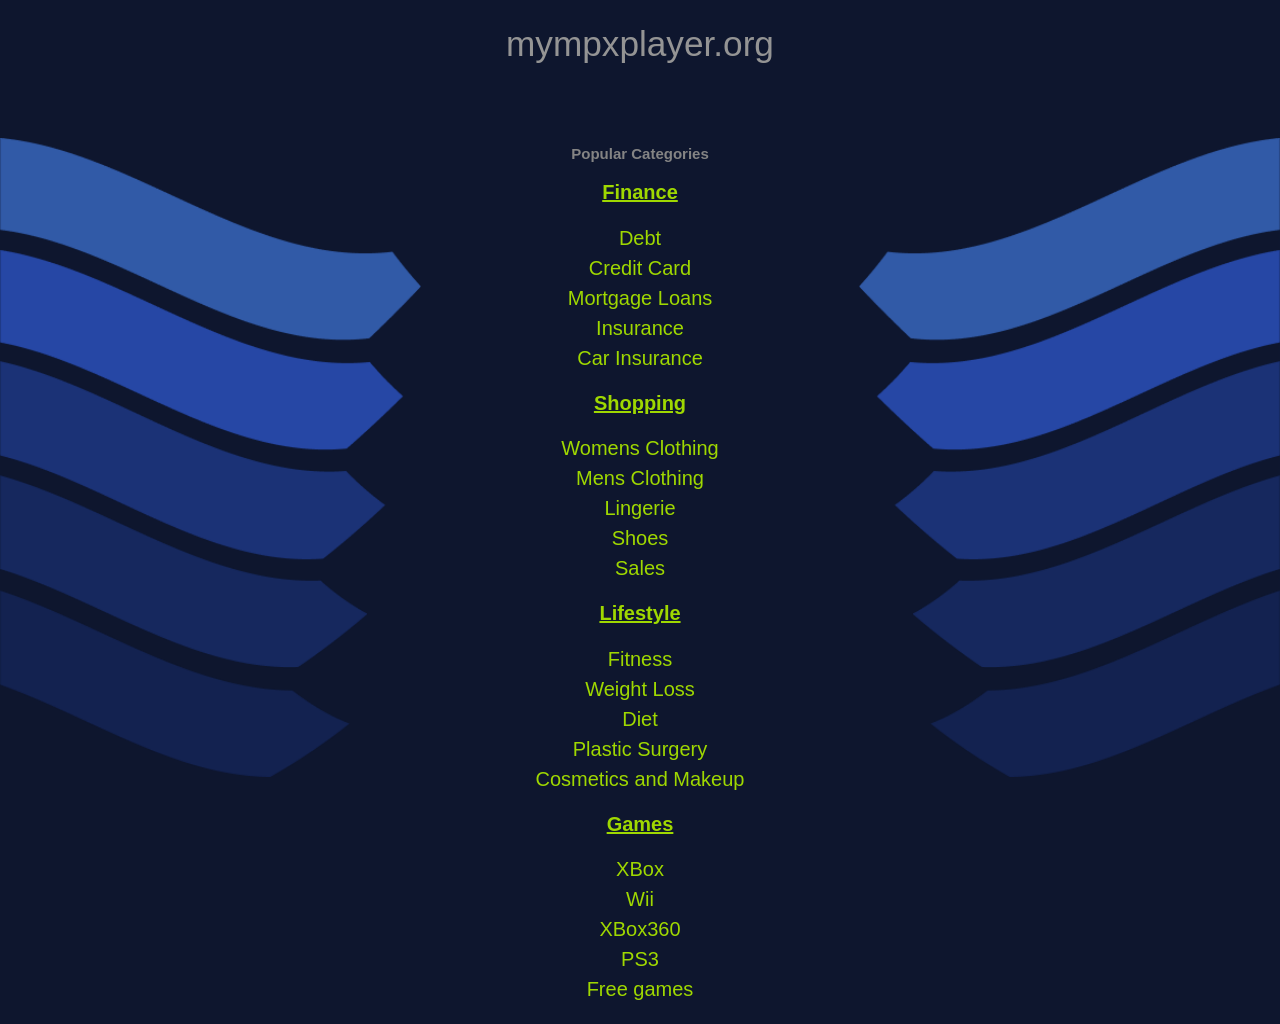 mympxplayer.org